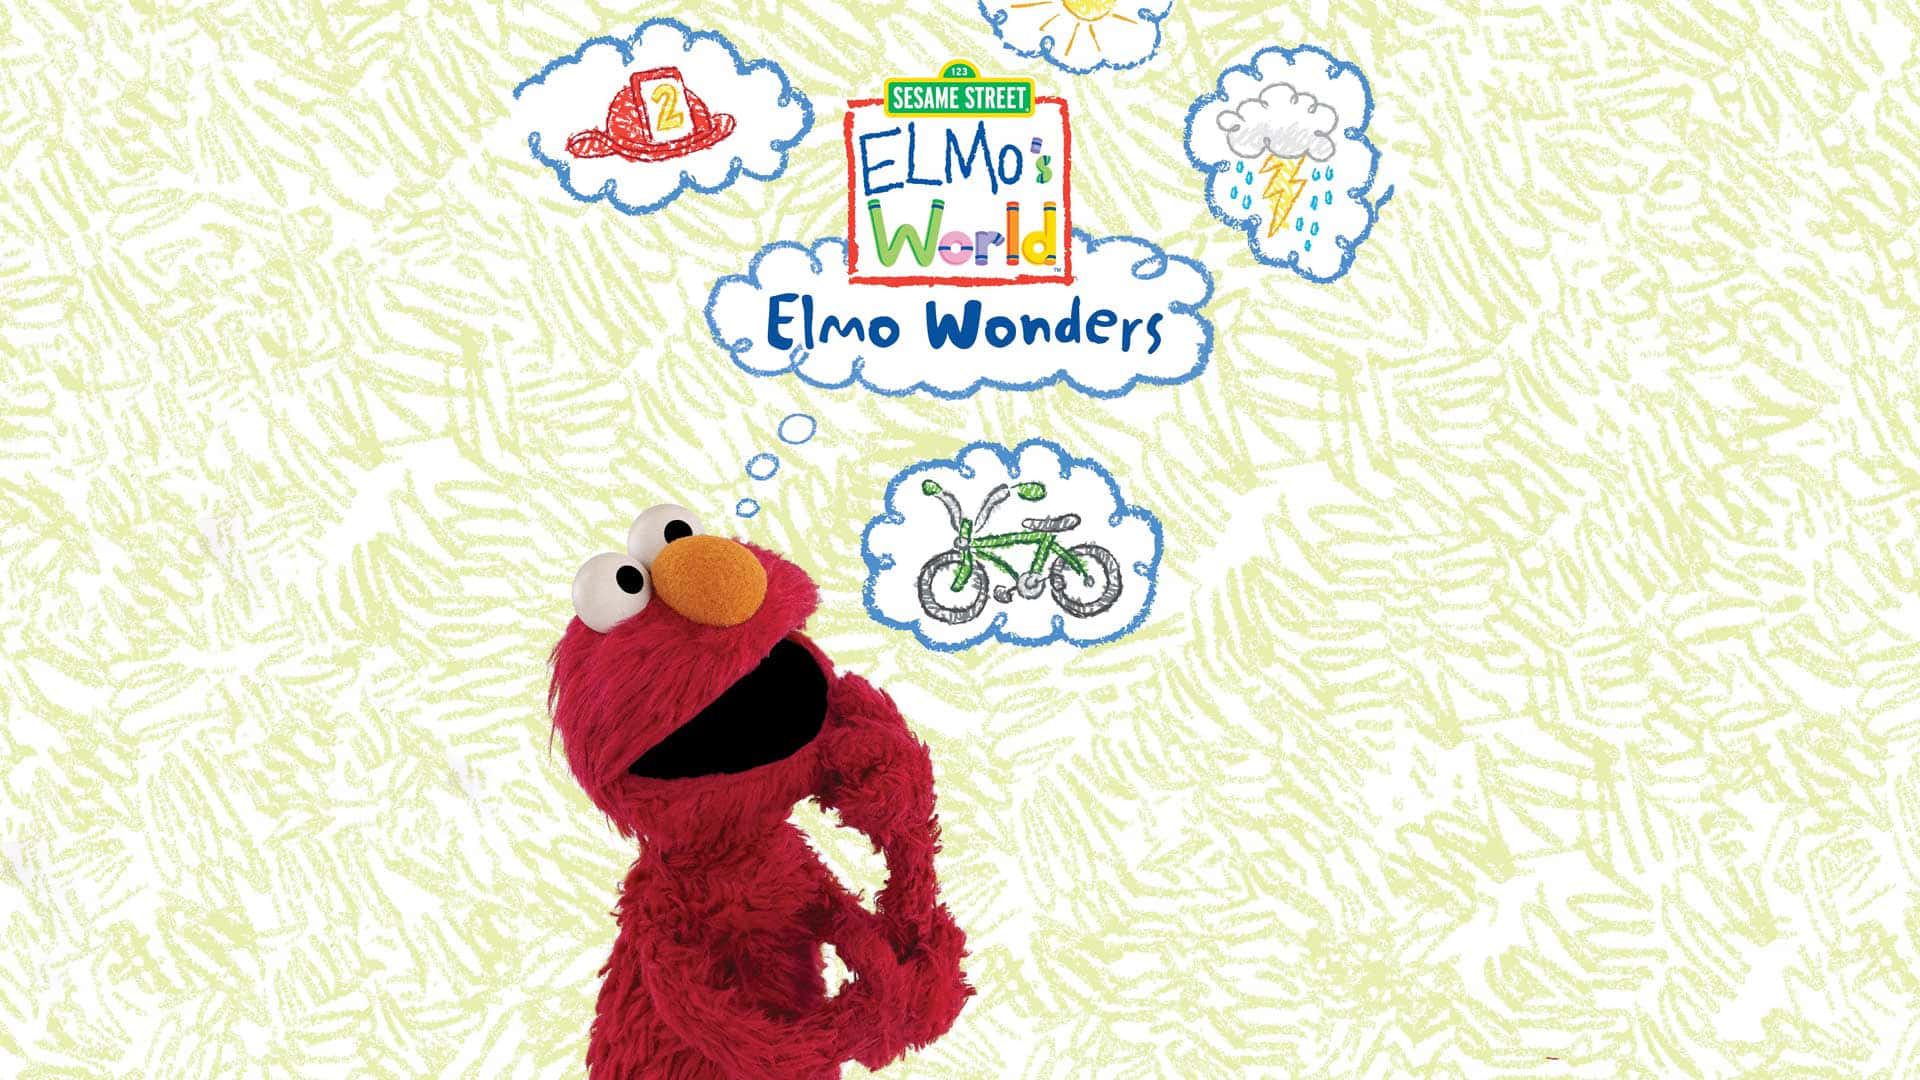 Have fun with Elmo in his world!